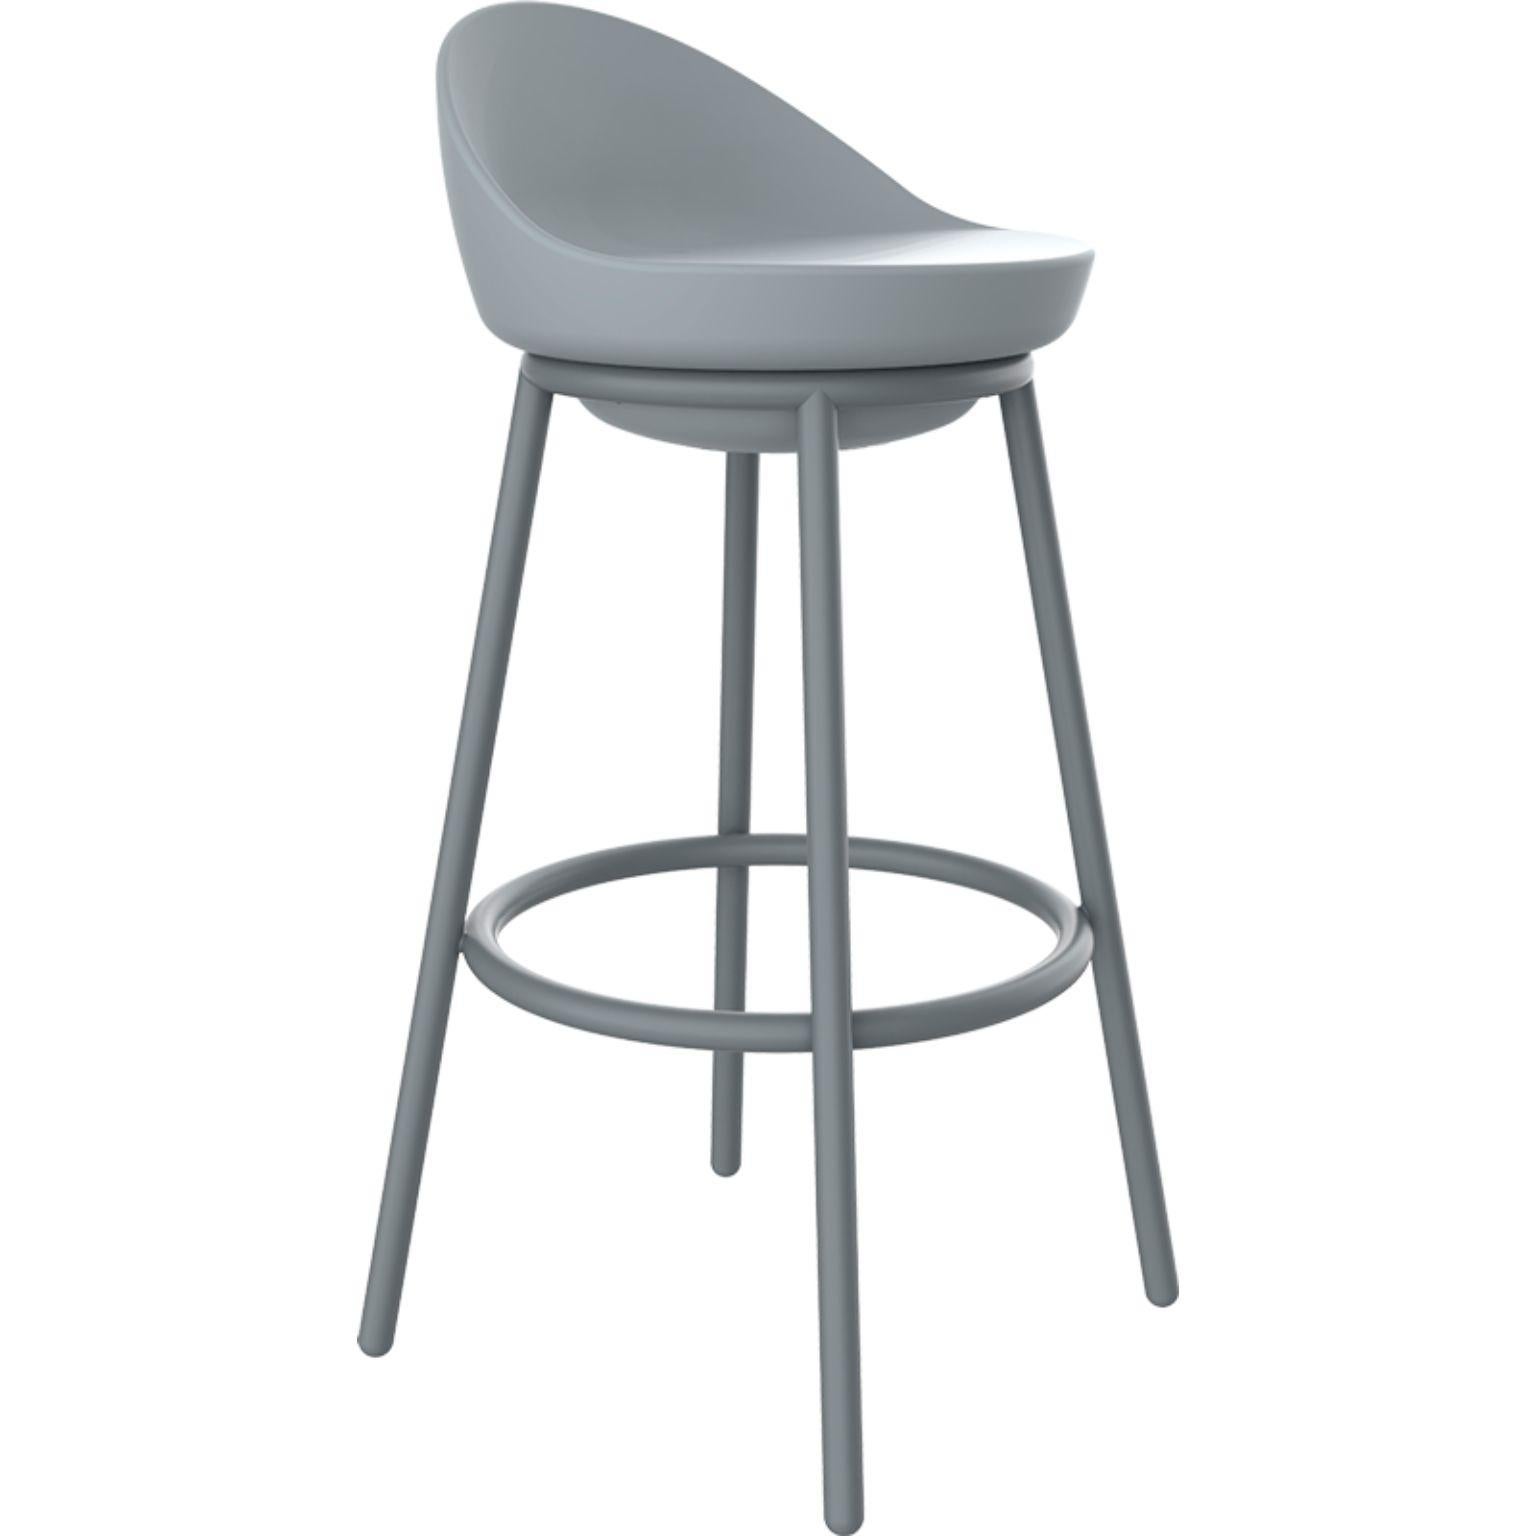 Lace grey stool by MOWEE.
Dimensions: D43 x H91 cm.
Material: polyethylene, stainless steel.
Weight: 6.7 kg
Also available in different colours and finishes. 

Lace is a collection of furniture made by rotomoulding. Its shape resembles a